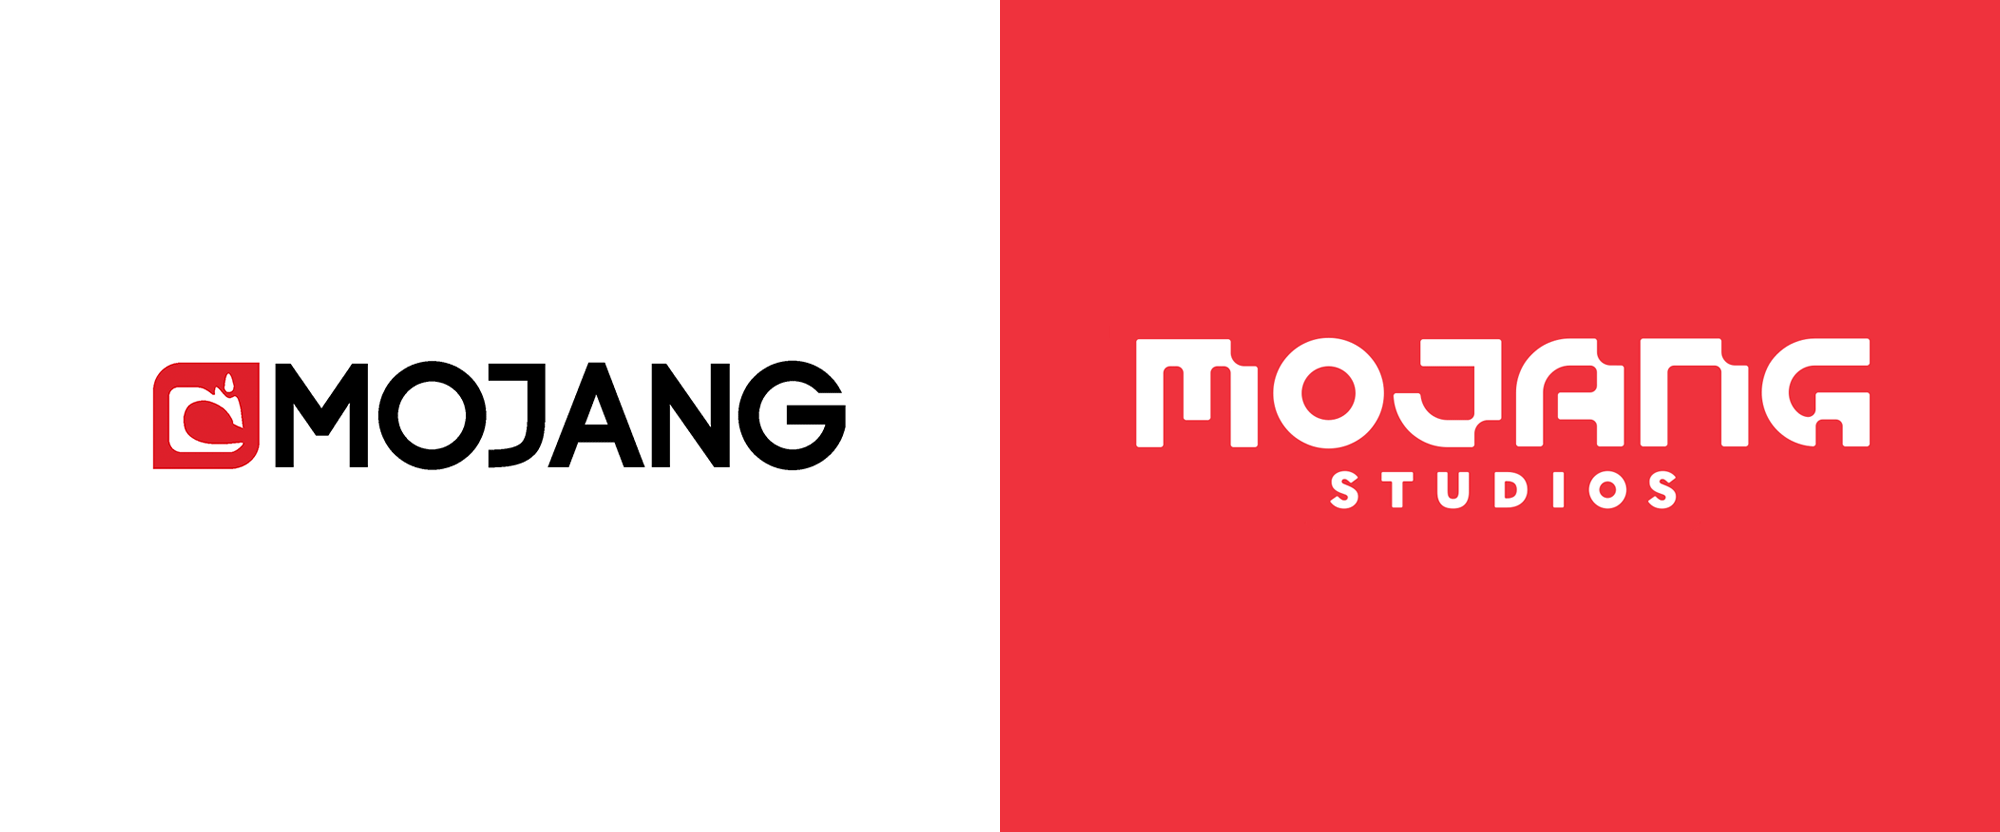 New Name and Logo for Mojang Studios by Bold (NoA) and In-house